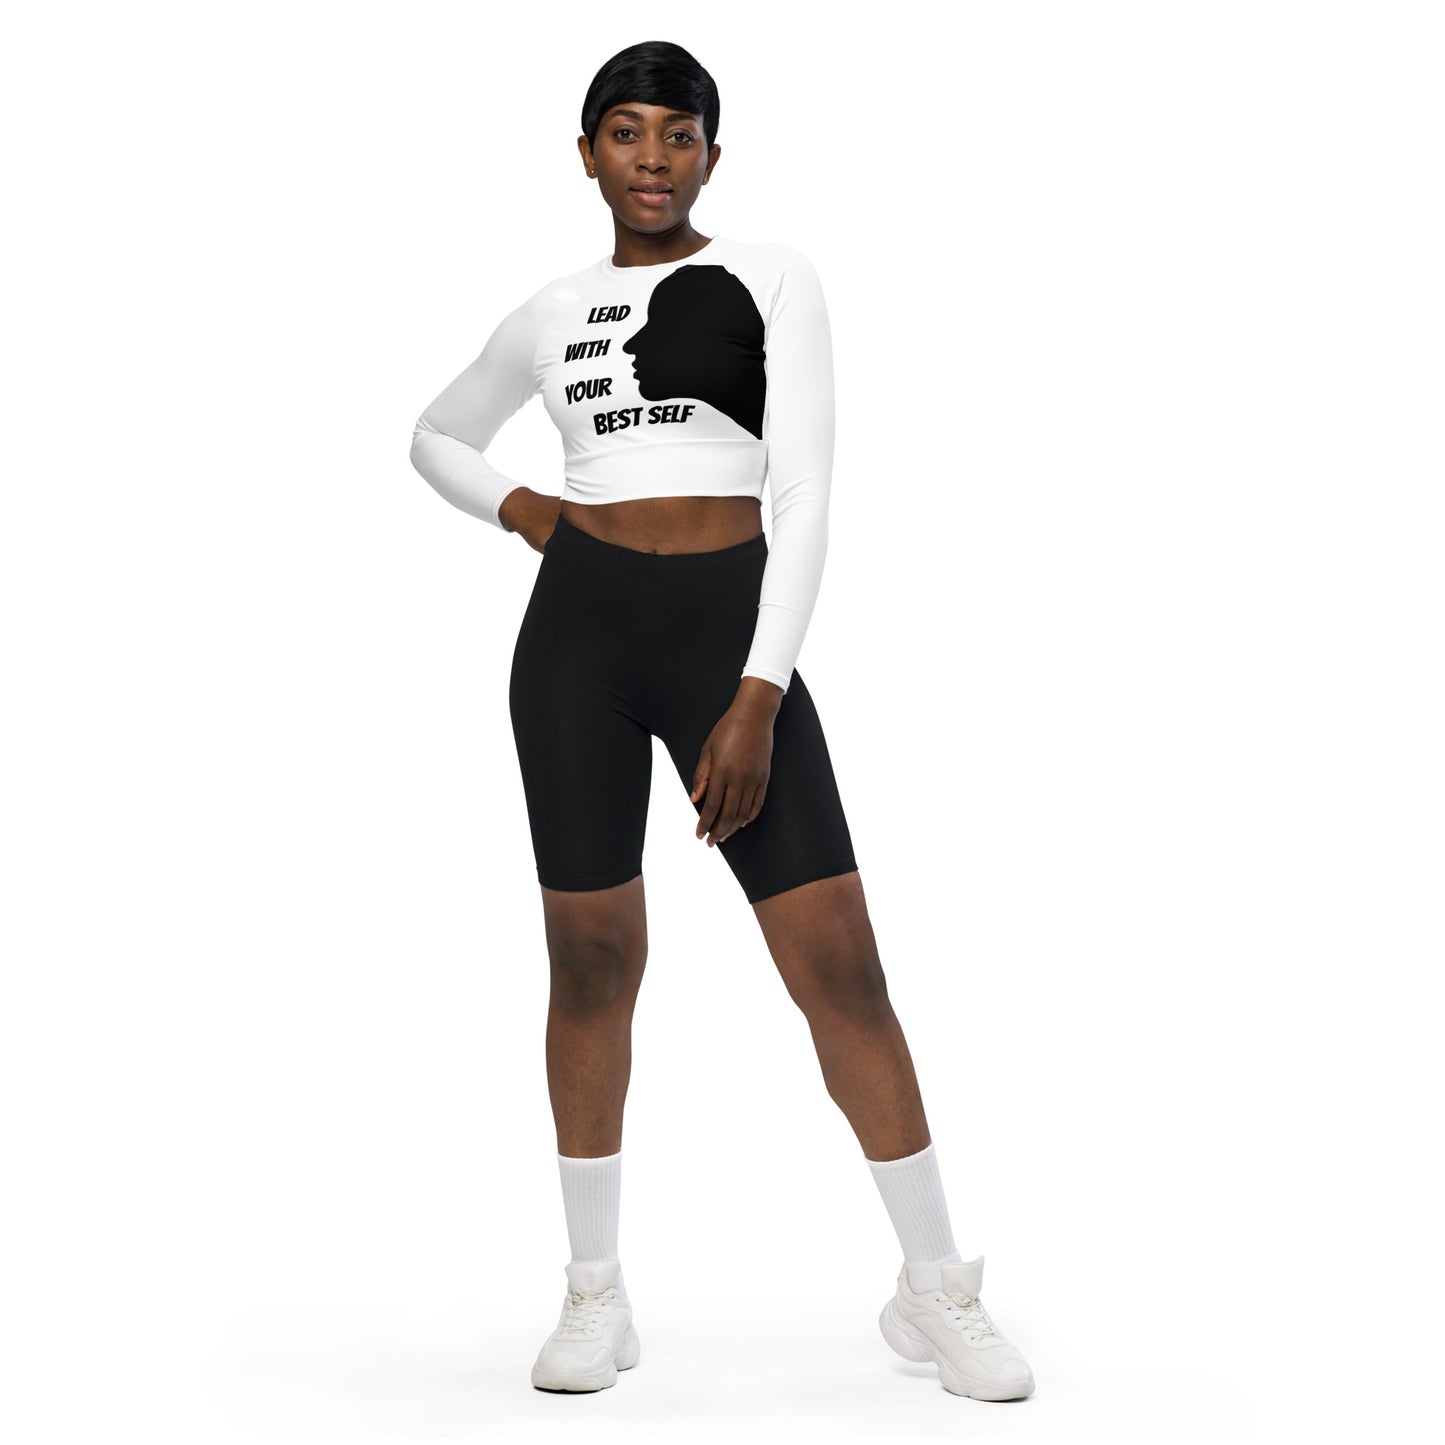 Dynamic Matching Long-Sleeve Crop – Maintain sexy in a bulk fest season with SpotlYght Seeker's design-matched crop top